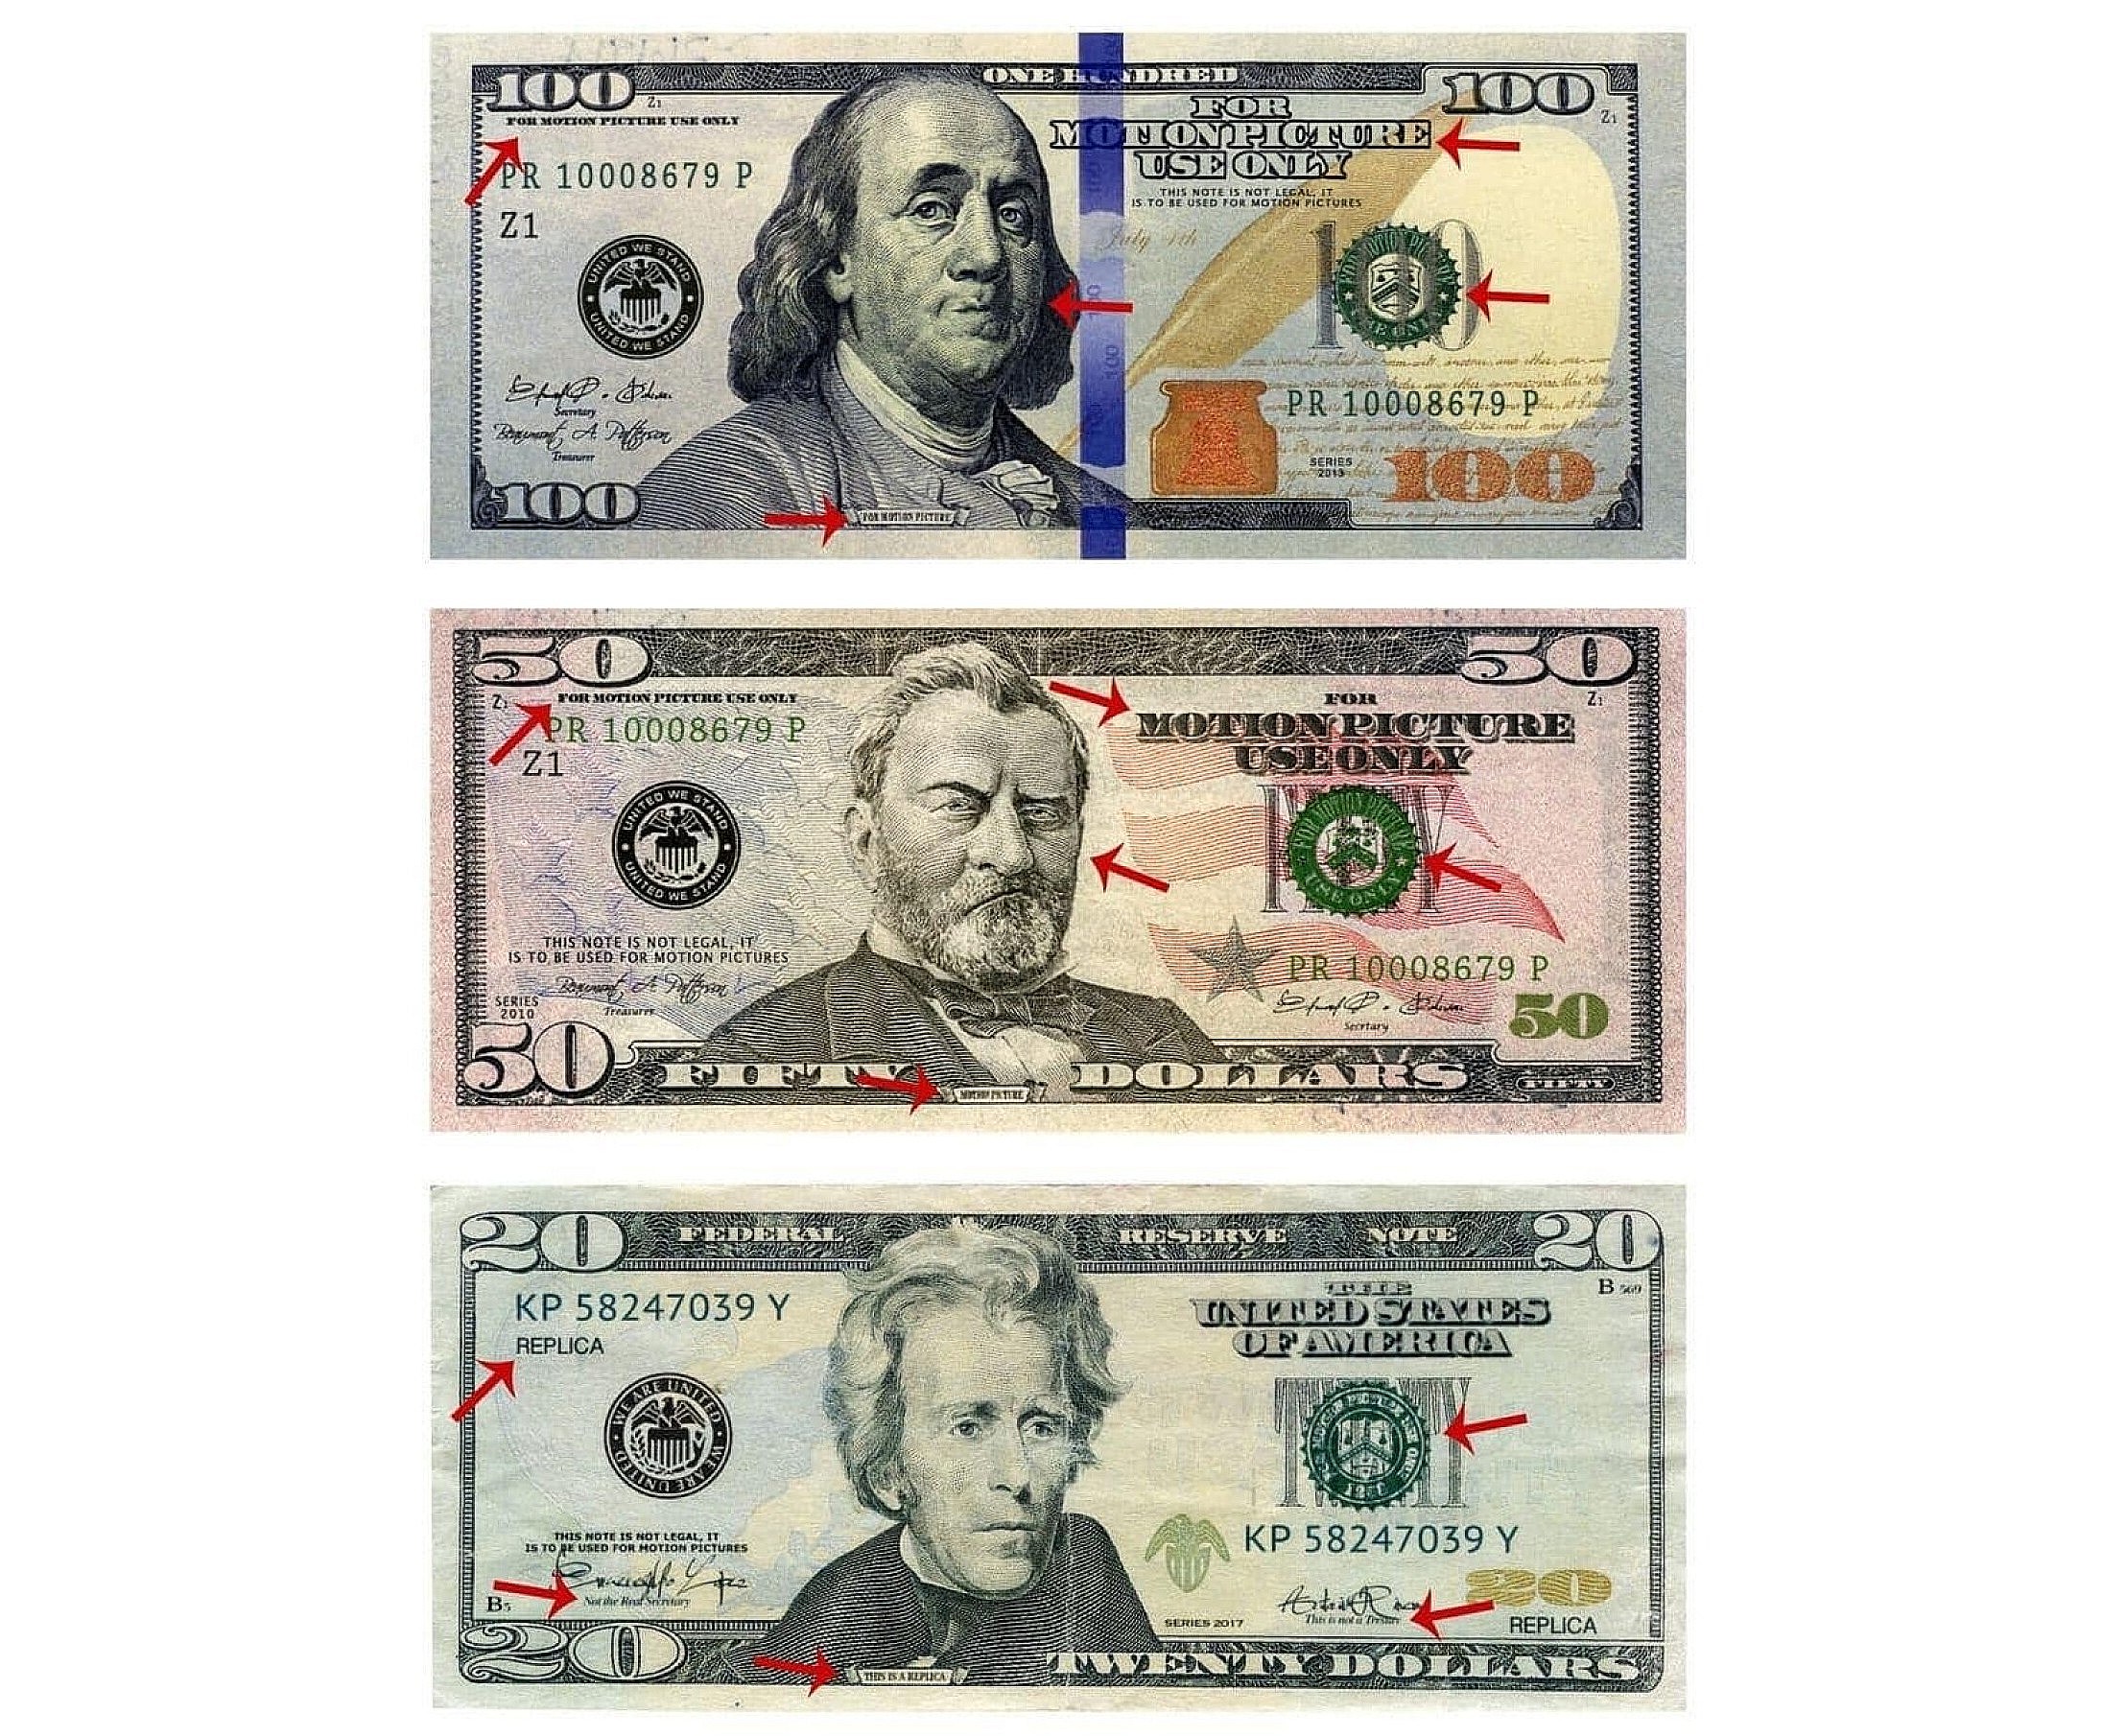 Sheriff Guidroz Gives Tips on How to Spot Counterfeit Money